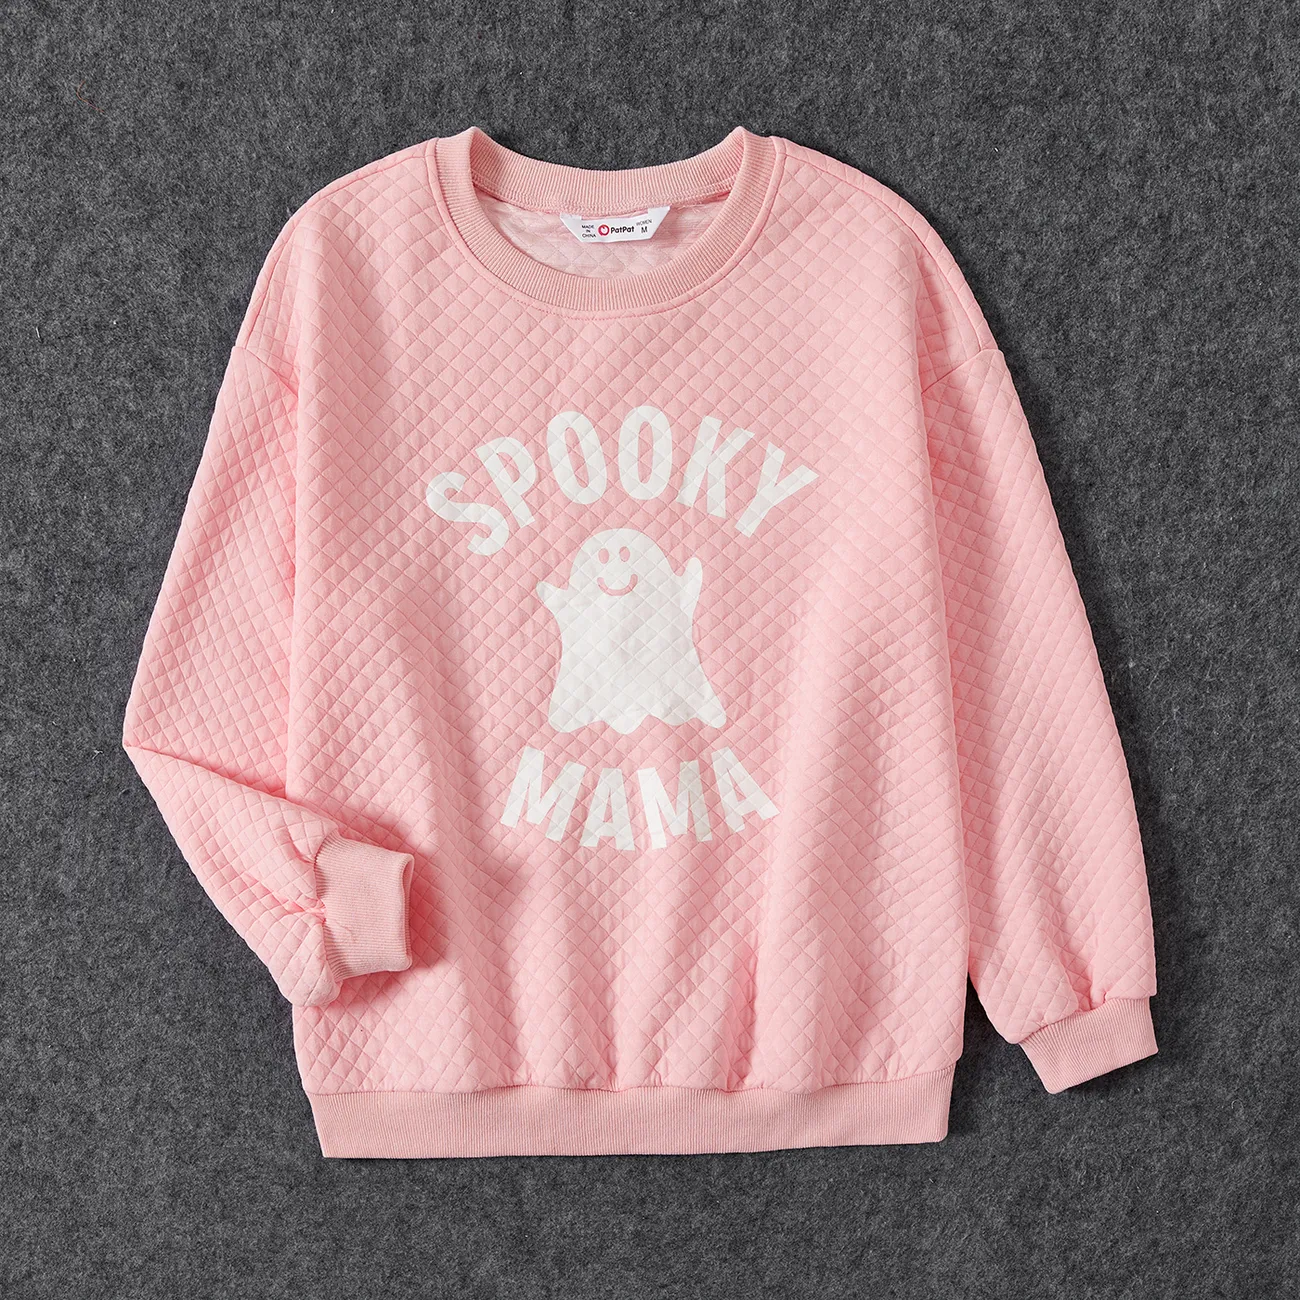 Halloween Family Matching Glow in the Dark Pink Letter & Ghost Print Tops Pink big image 1